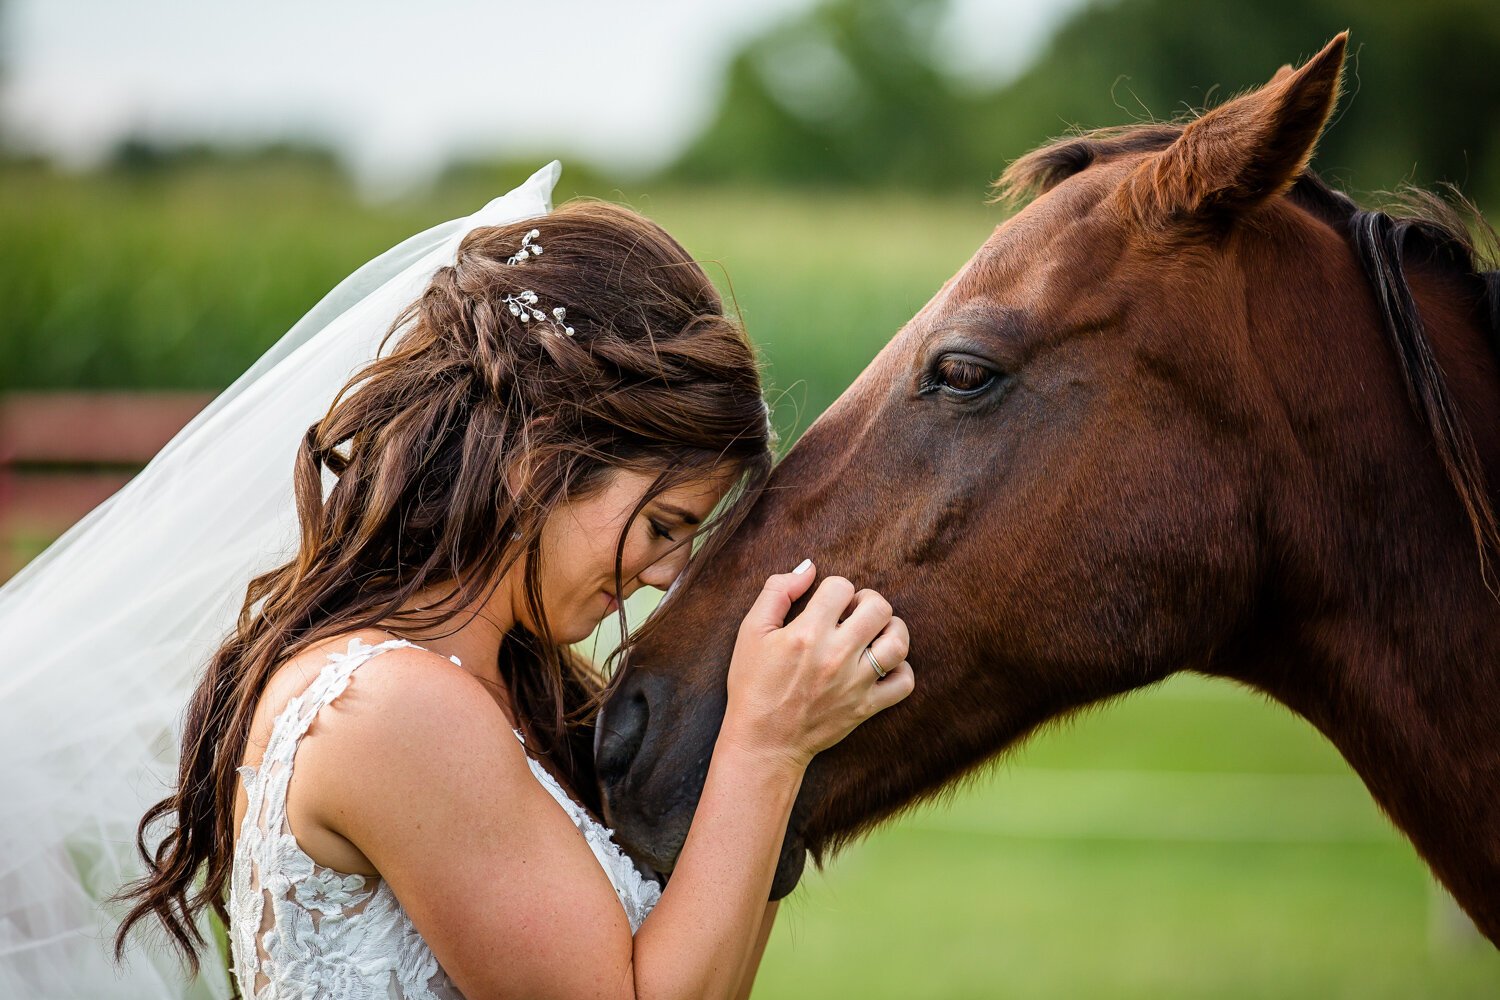 Bride poses with horse on wedding day